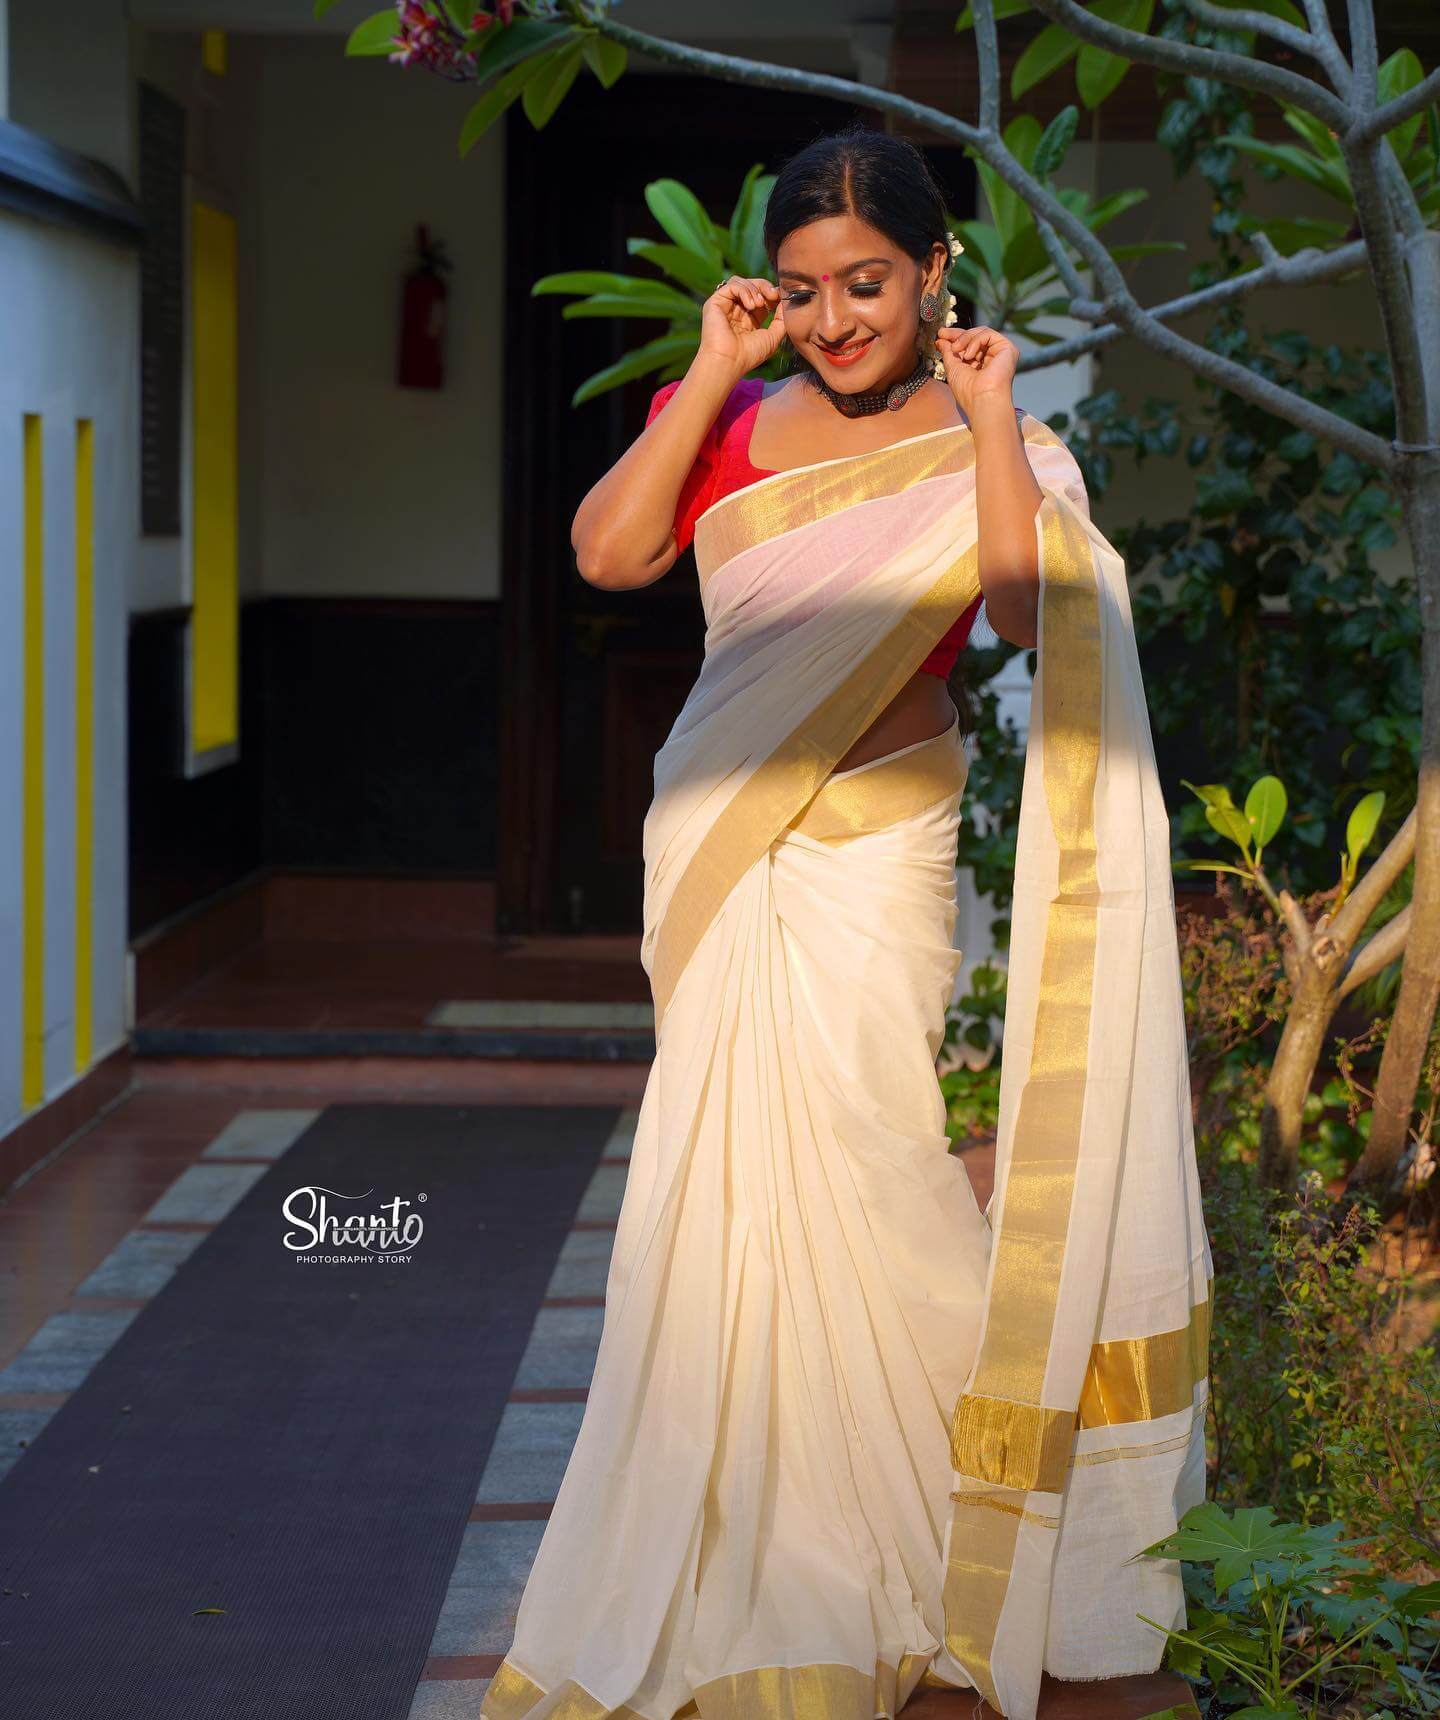 Alphy Panjikaran  Slaying The Ethic Look In White Saree With Red Blouse With Bun Hairstyle